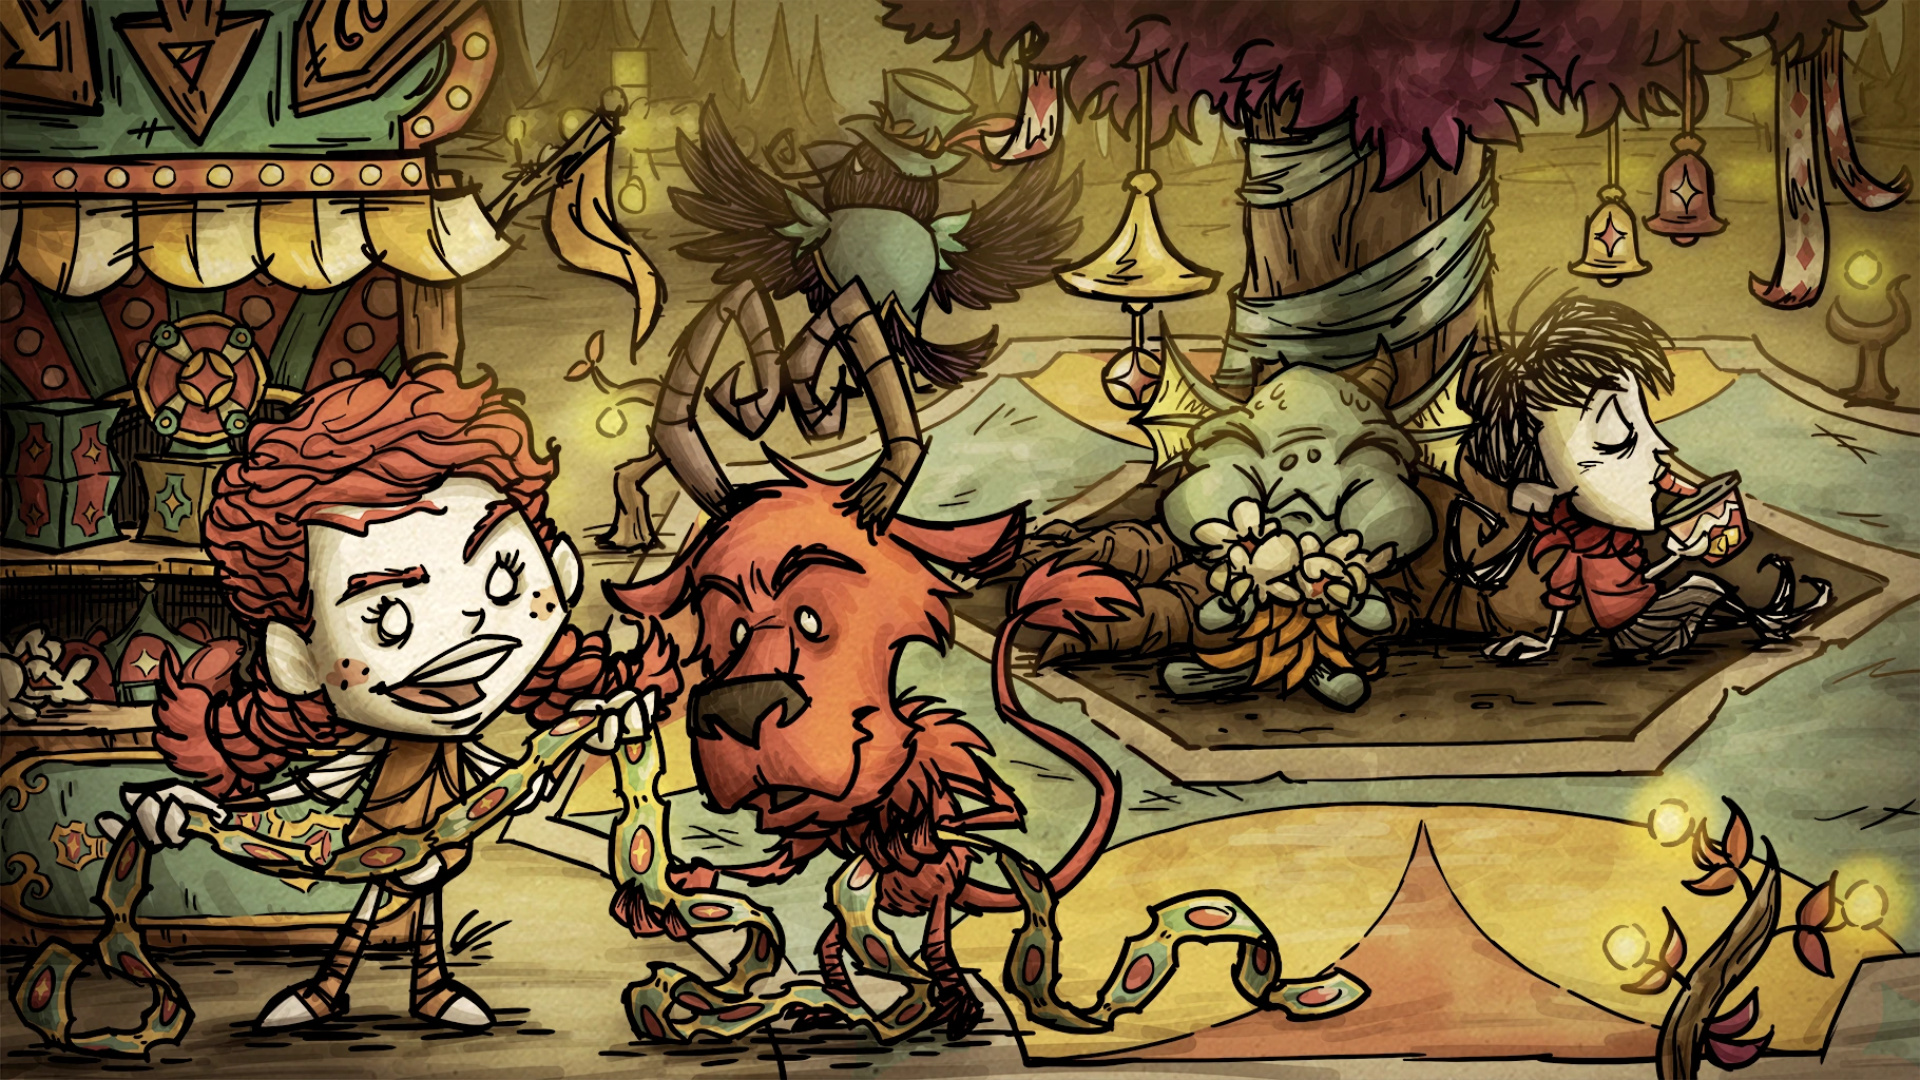 Don t bang. Don't Starve игра. Don't Starve together карнавал. Донт старв 3. Don't Starve together игрушки.